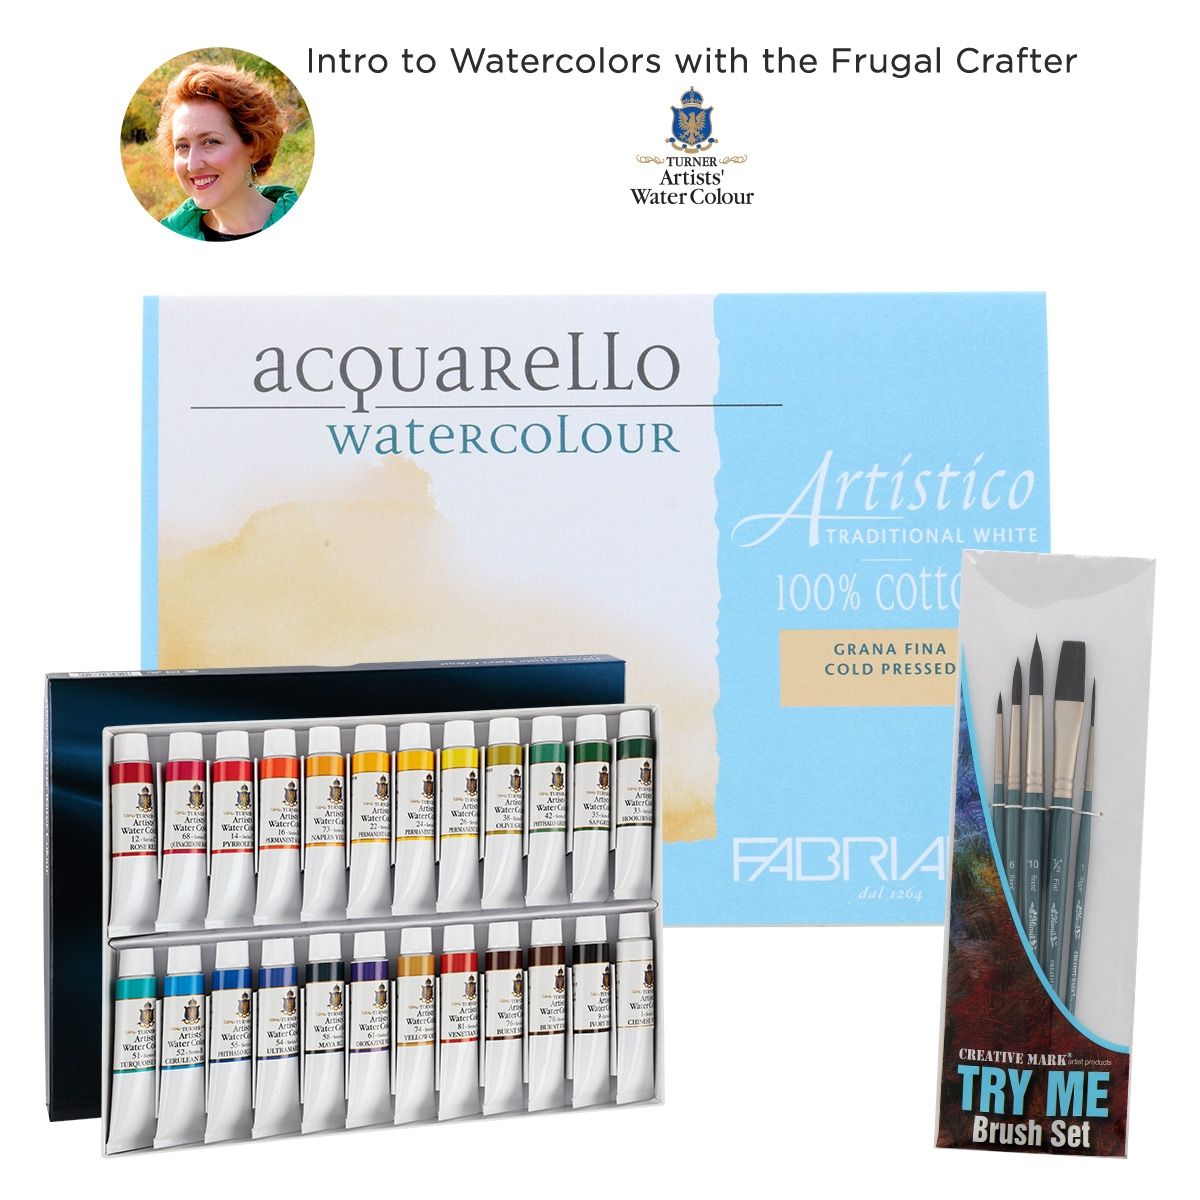 Lindsay Weirich Signature Turner Watercolor Sets